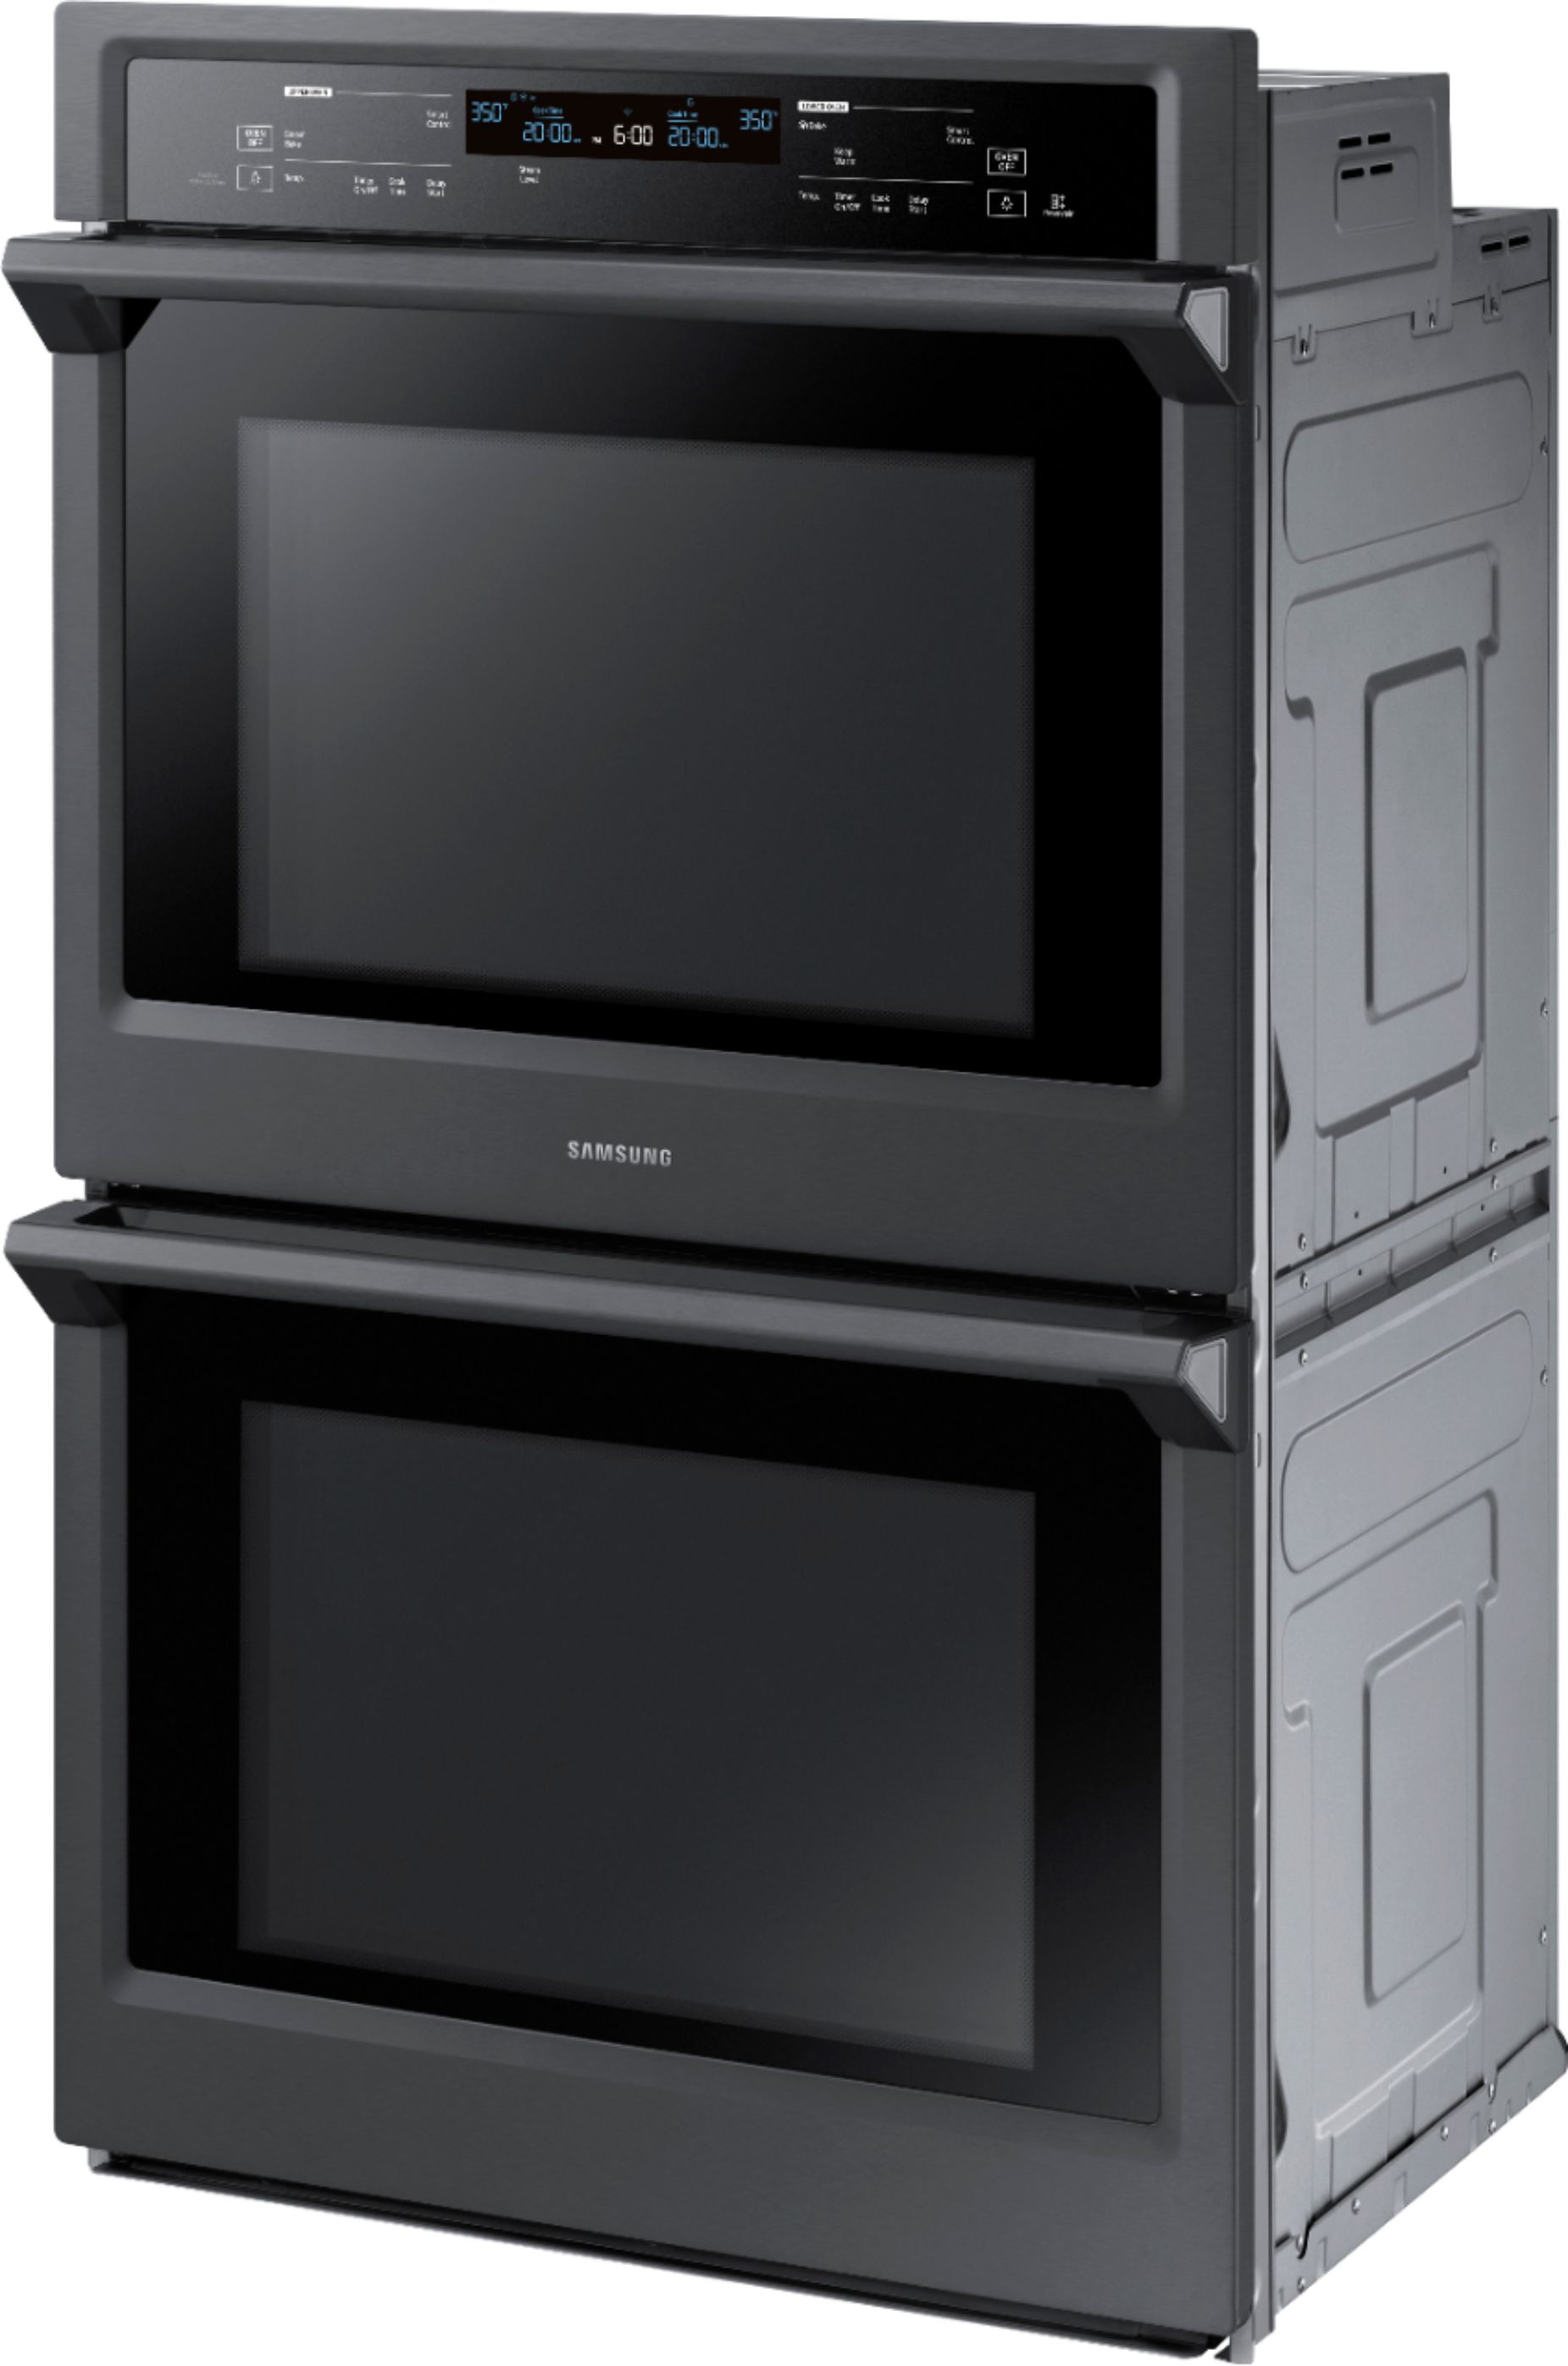 Samsung 30" Double Wall Oven with Steam Cook and WiFi Fingerprint